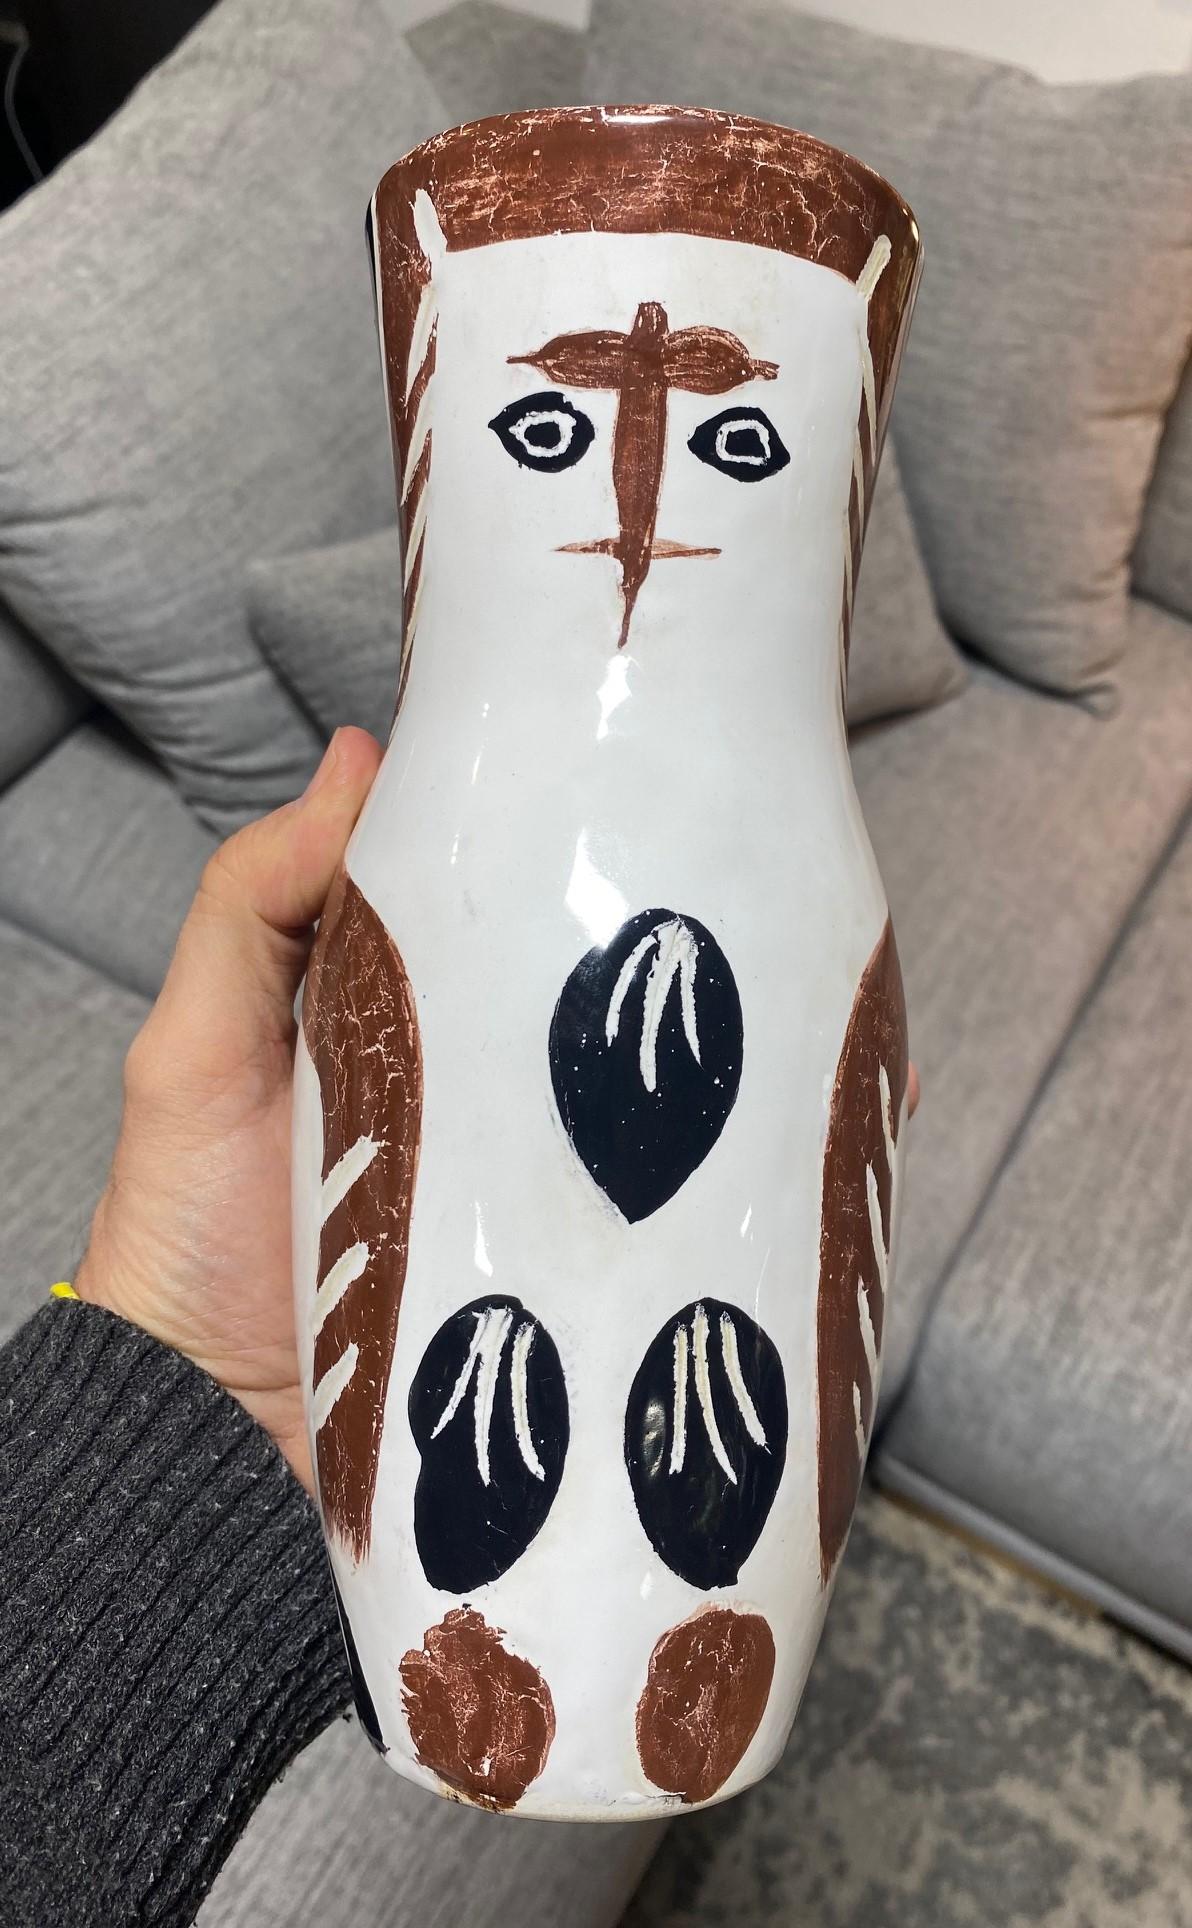 Pablo Picasso Signed Limited Madoura Pottery Chouetton Owl Vase A.R. 135, 1952 For Sale 7